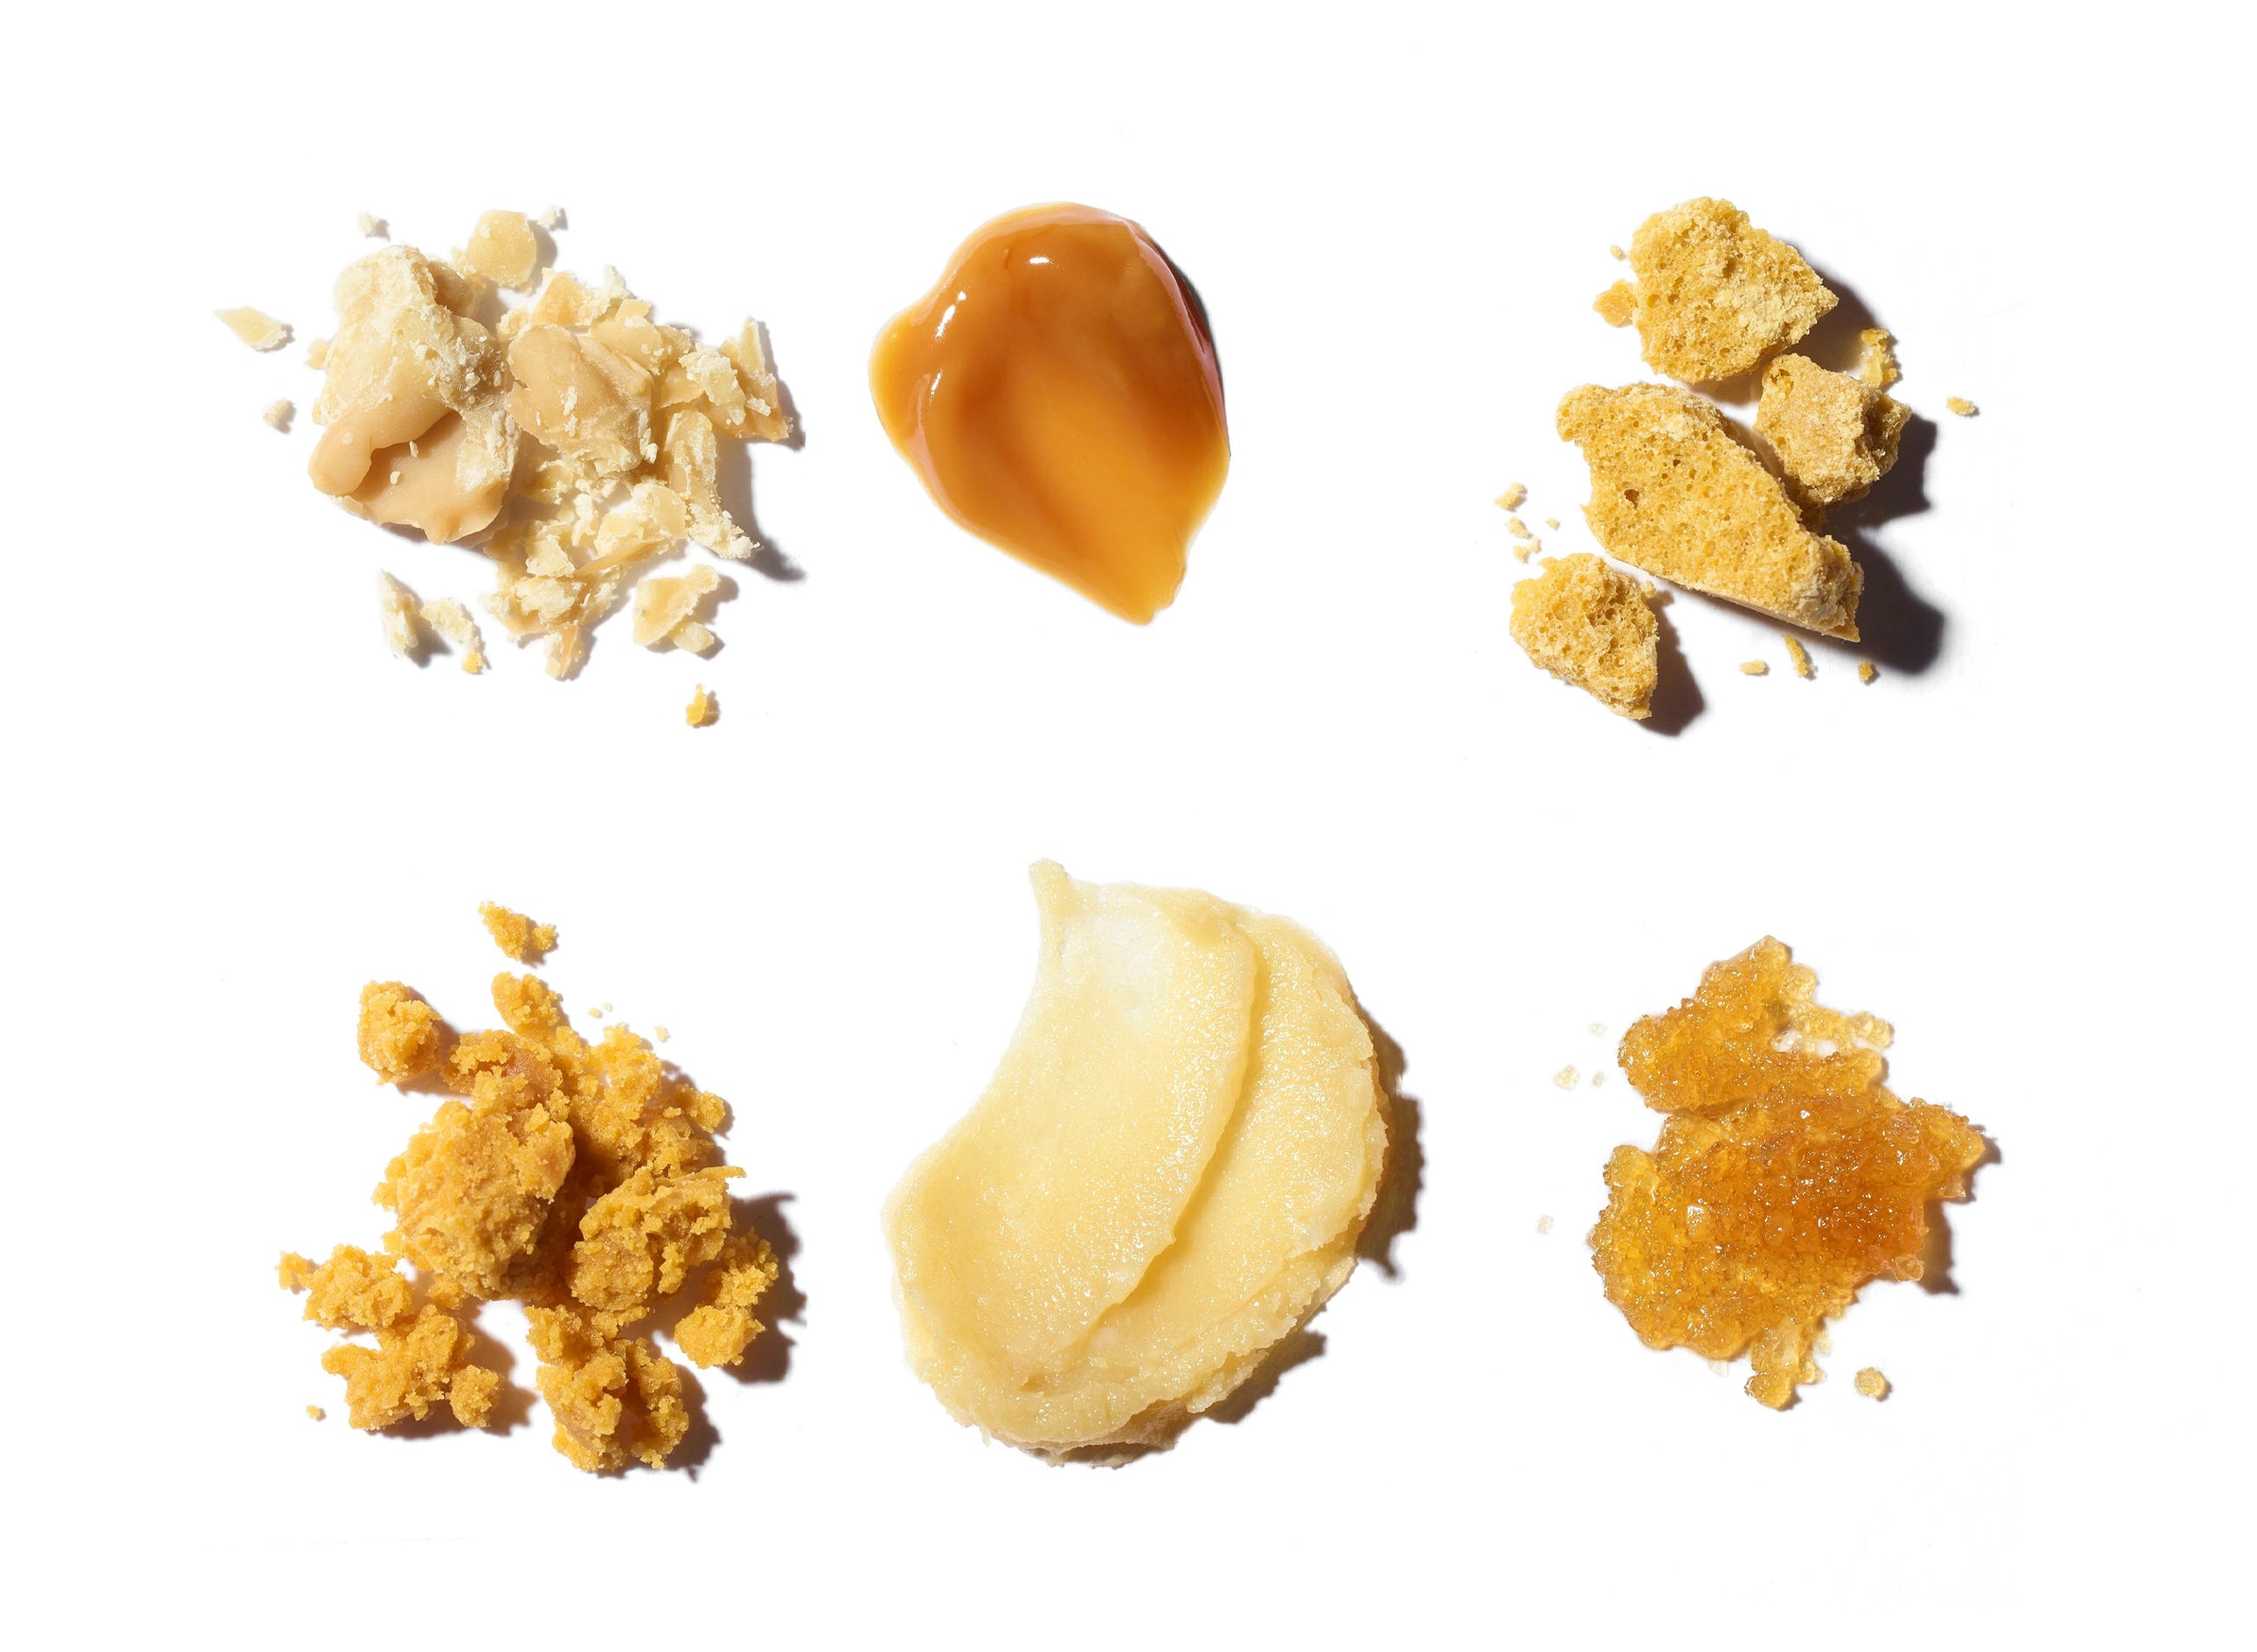 Cannabis Concentrates 101: The Golden Guide To The Different Types of Concentrates